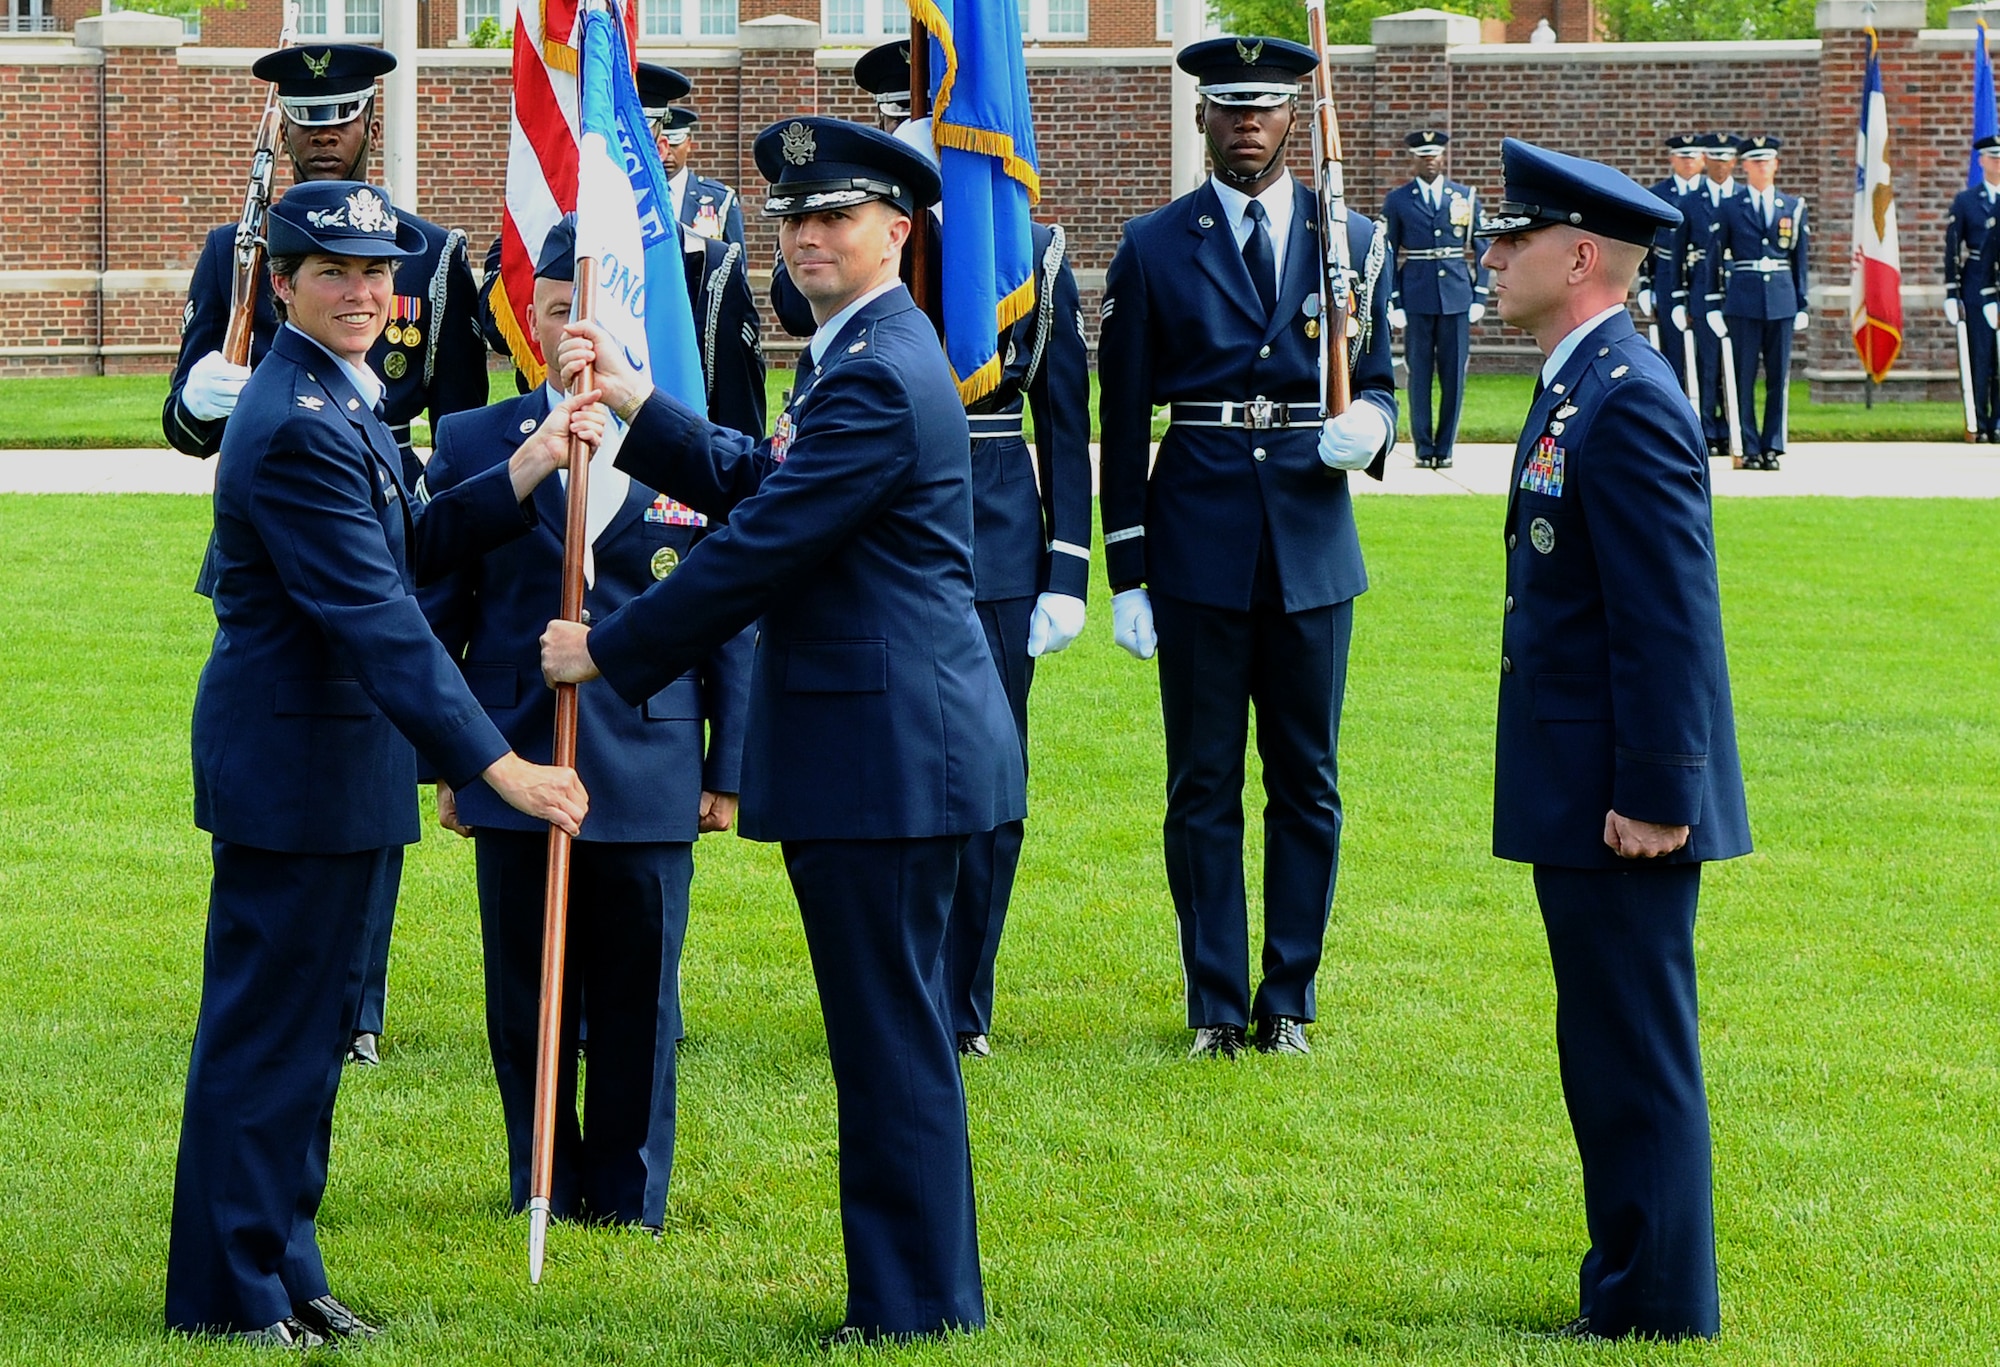 Col. Elizabeth Borelli, 11th Operations Group commander, passes a guidon to Lt. Col. Raymond M. Powell symbolizing his assumption of command of the U.S. Air Force Honor Guard from, during the change-of-command ceremony June 23 on the U.S. Air Force Ceremonial Lawn, Bolling Air Force Base, D.C. These ceremonies represent the formal passing of responsibility, authority and accountability of command from one officer to another. (U.S. Air Force photo by Senior Airman Alex Montes)